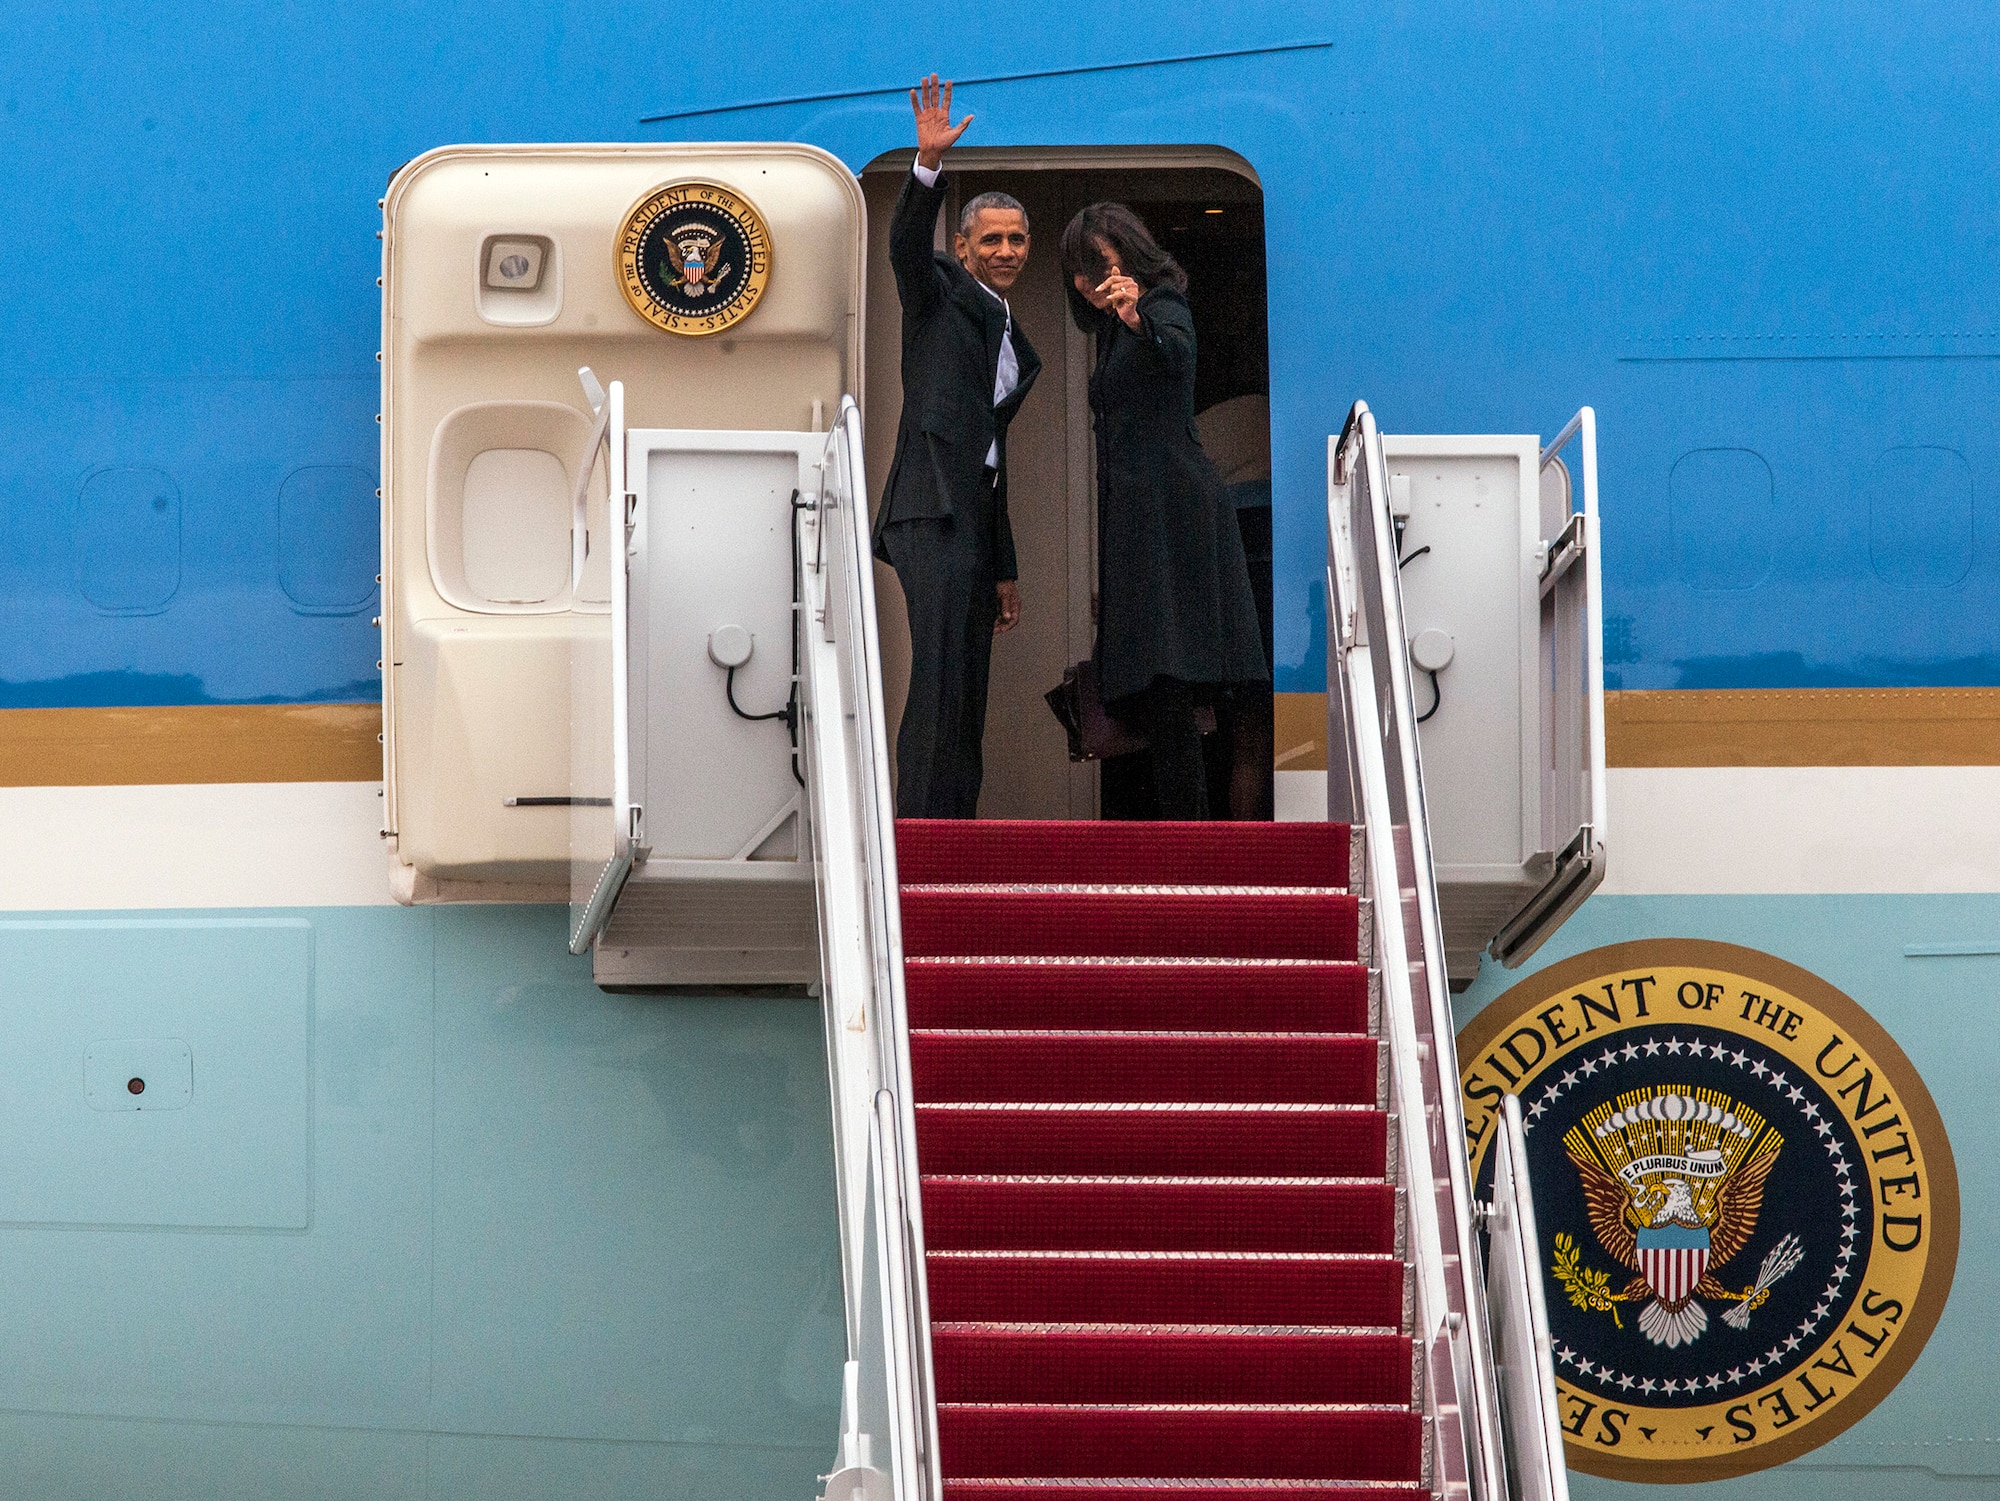 President Barack Obama and first lady Michelle Obama wave goodbye to a crowd of Americans as they board Air Force One at Joint Base Andrews, Md., March 20, 2016. The president and first family are on a two-day visit to Cuba, making history as the first U.S. president to visit Cuba in nearly 90 years. (U.S. Air Force photo/Senior Master Sgt. Kevin Wallace)